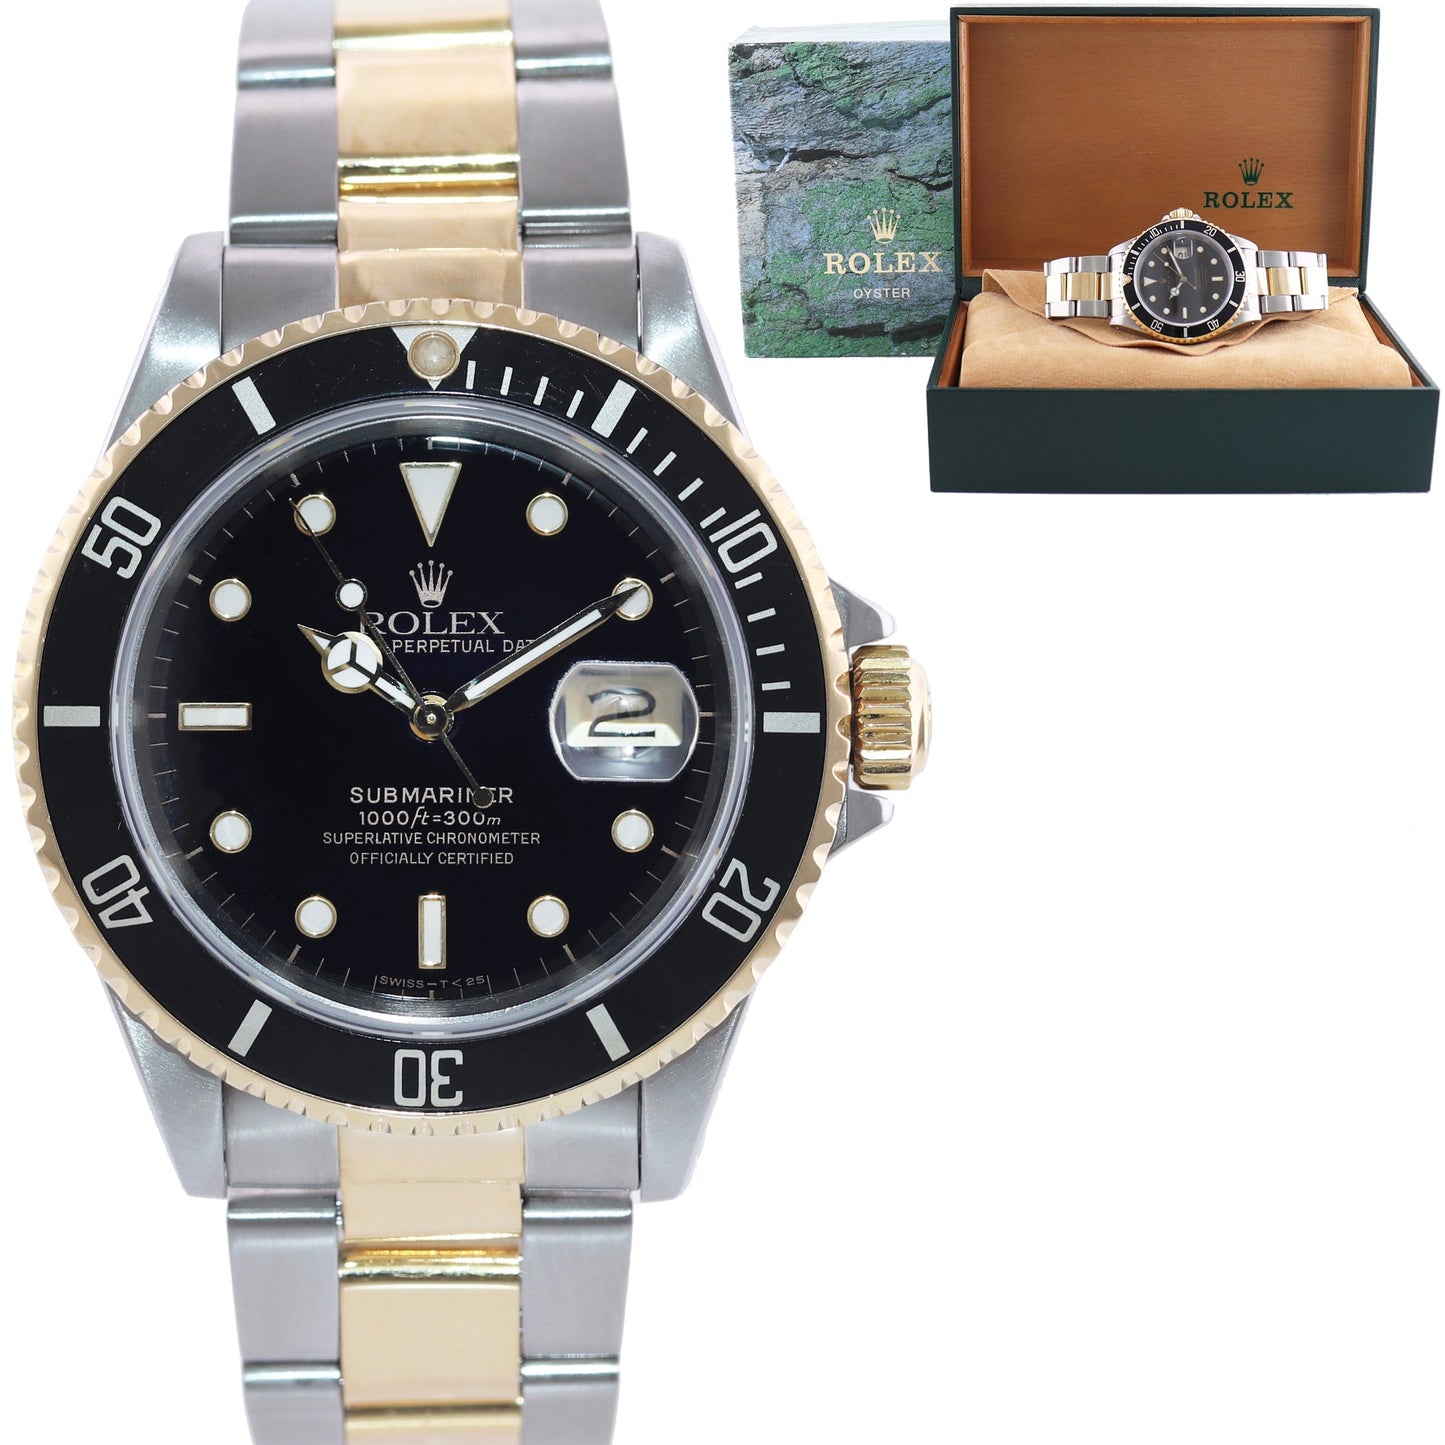 MINT 1998 Rolex Submariner 16613 Gold Steel 40mm Two Tone Black Dial Watch Box